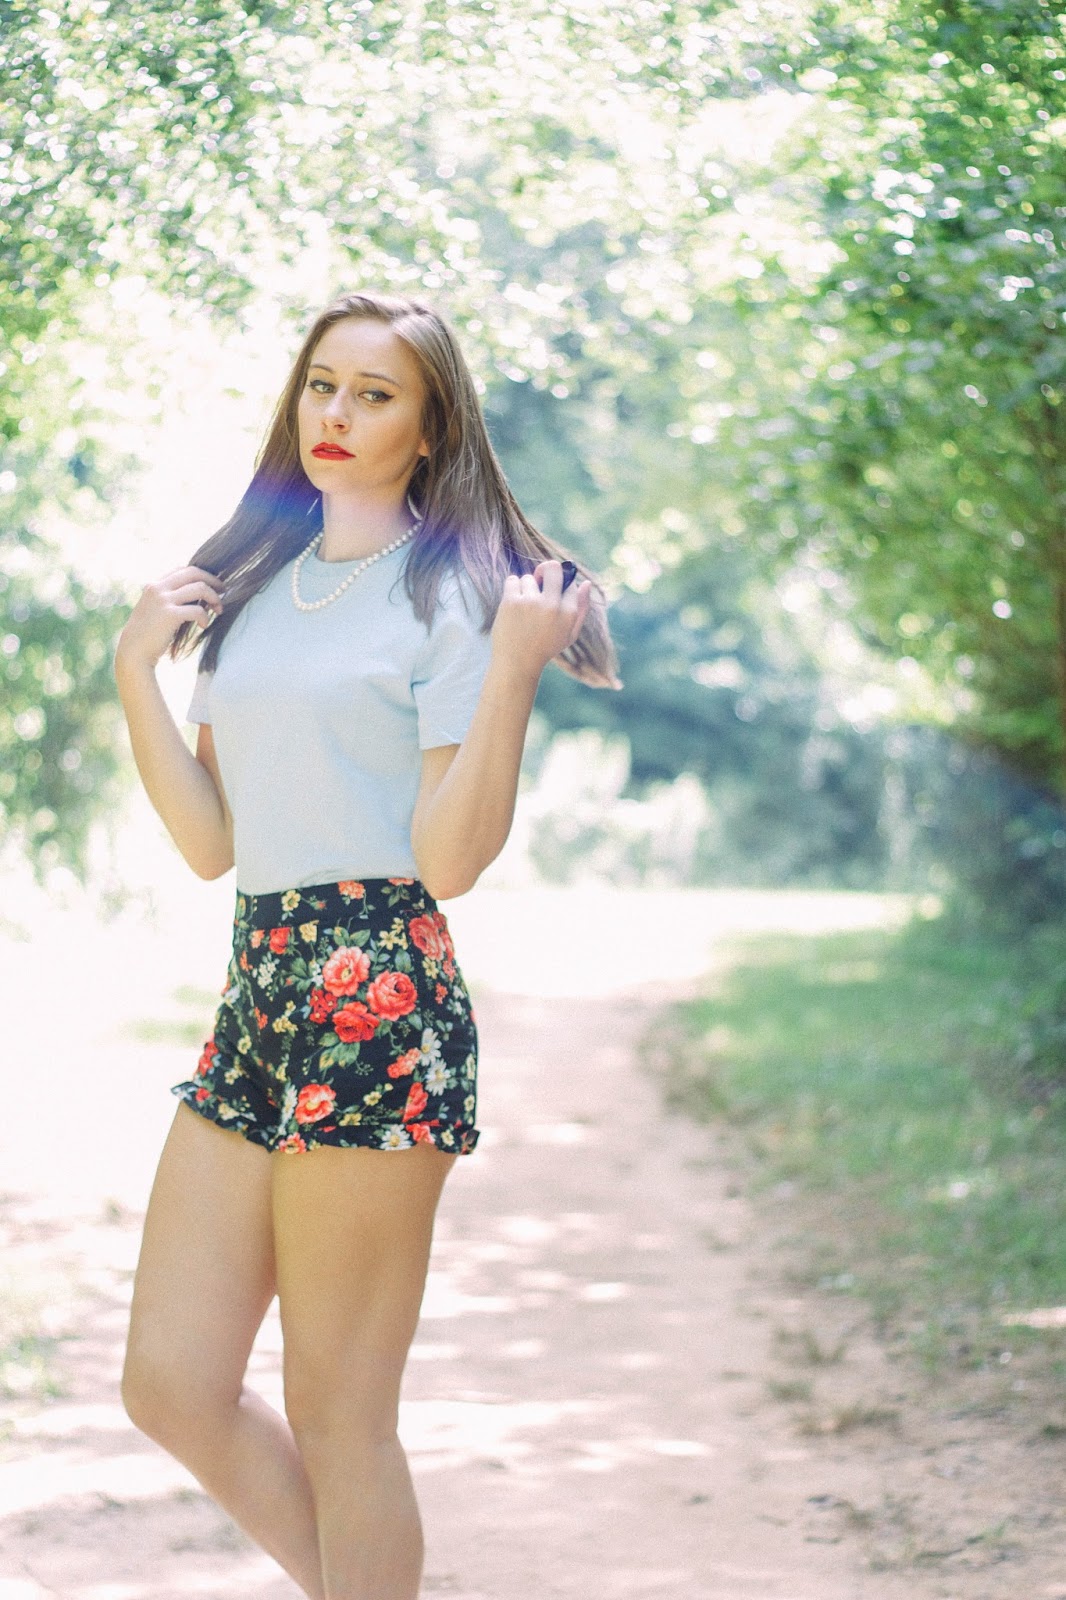 style, vintage, retro, vintage style, retro style, floral high waisted shorts, forever 21, girly outfit, classy style, summer, fashion blogger, personal style blogger, film blogger, film, photography, whimsical, taylor swift style, screenwriting,